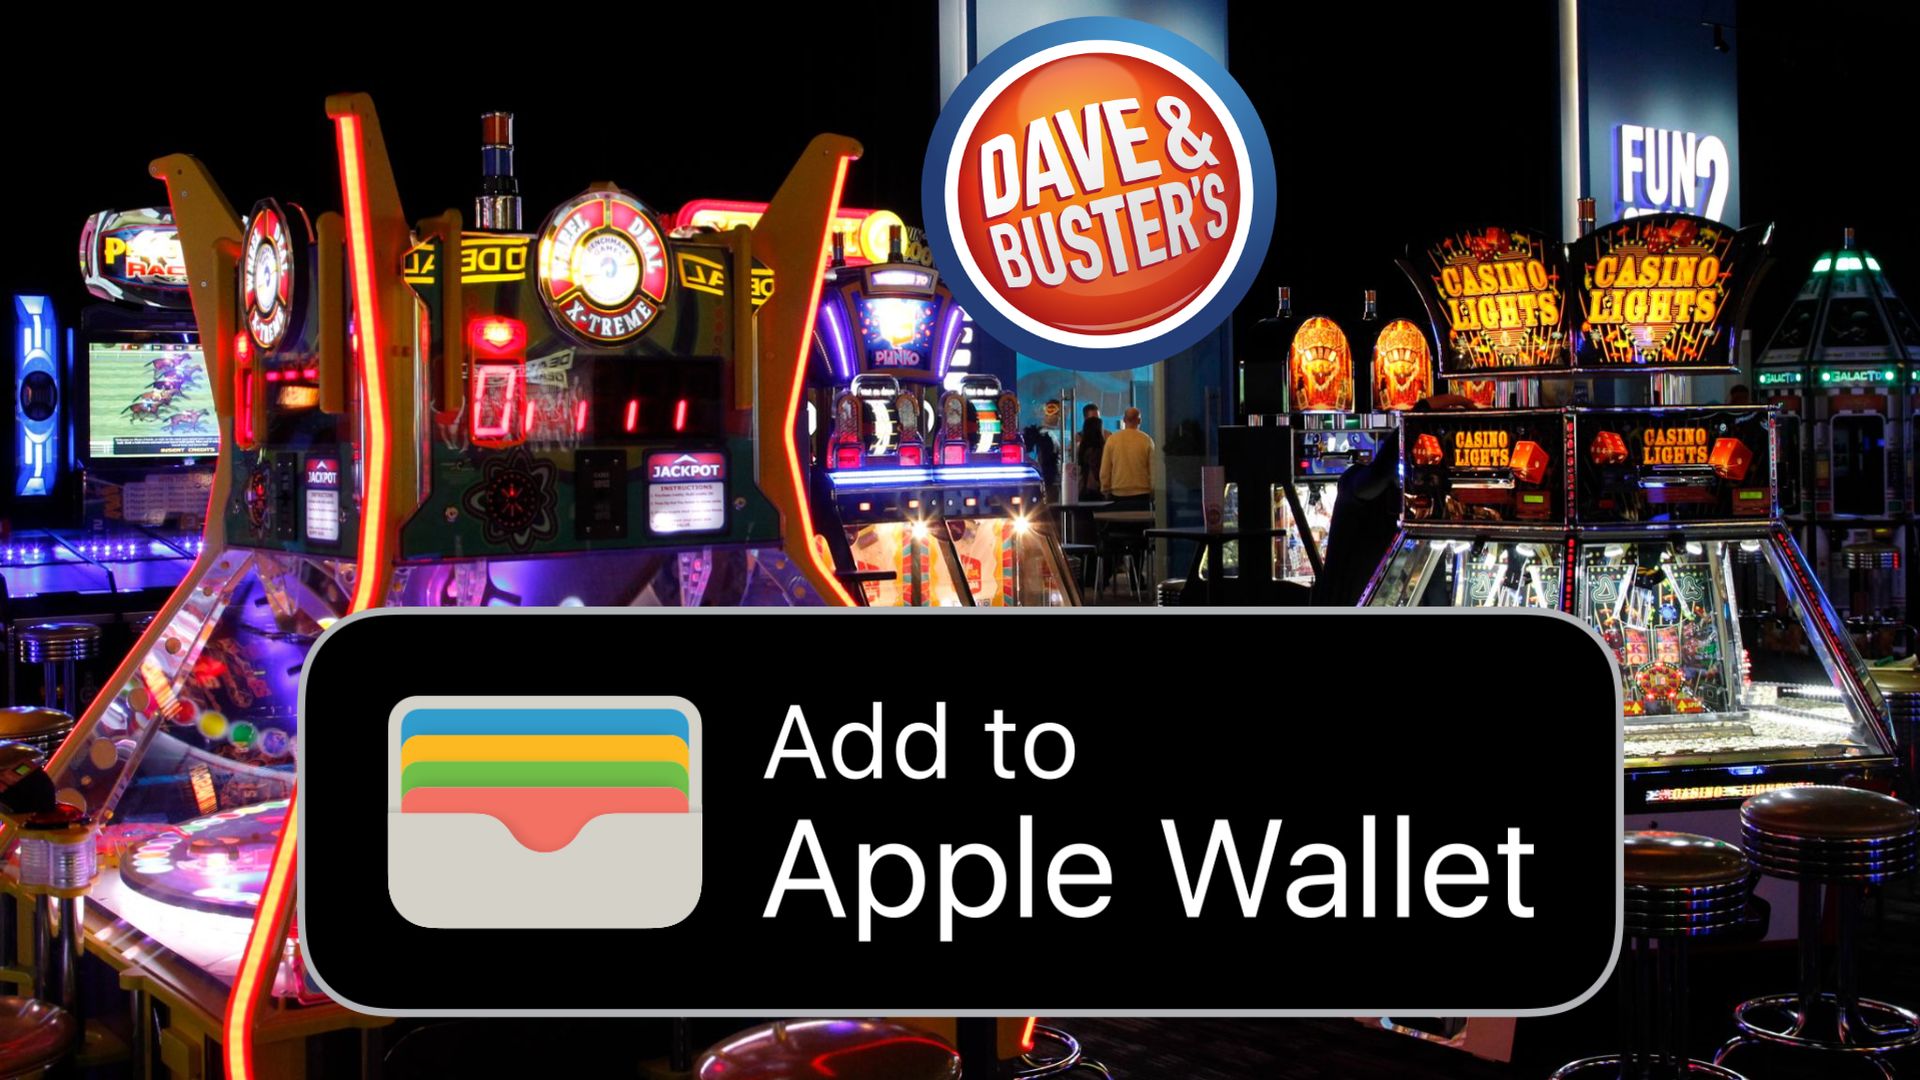 How to add Dave and Buster's card to Apple Wallet?